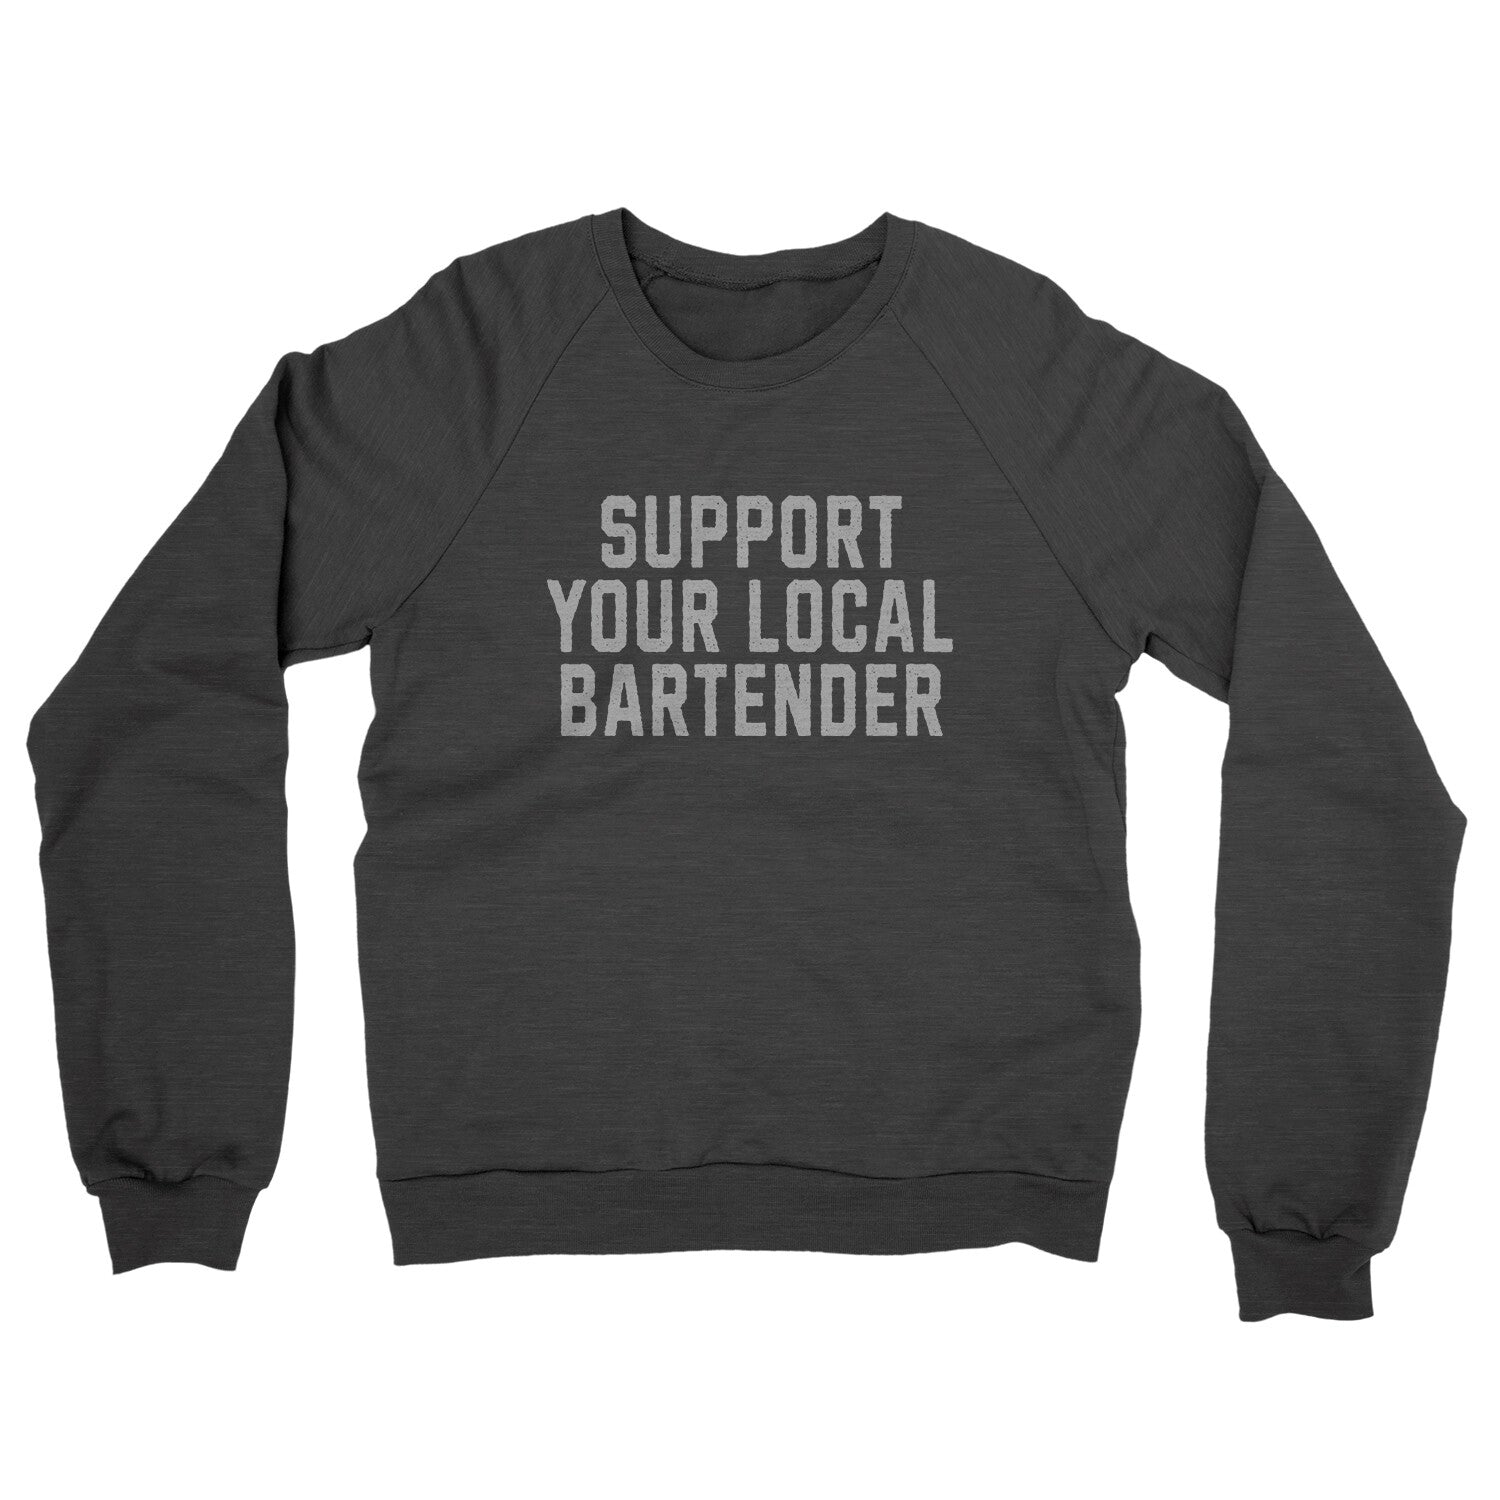 Support your Local Bartender in Charcoal Heather Color